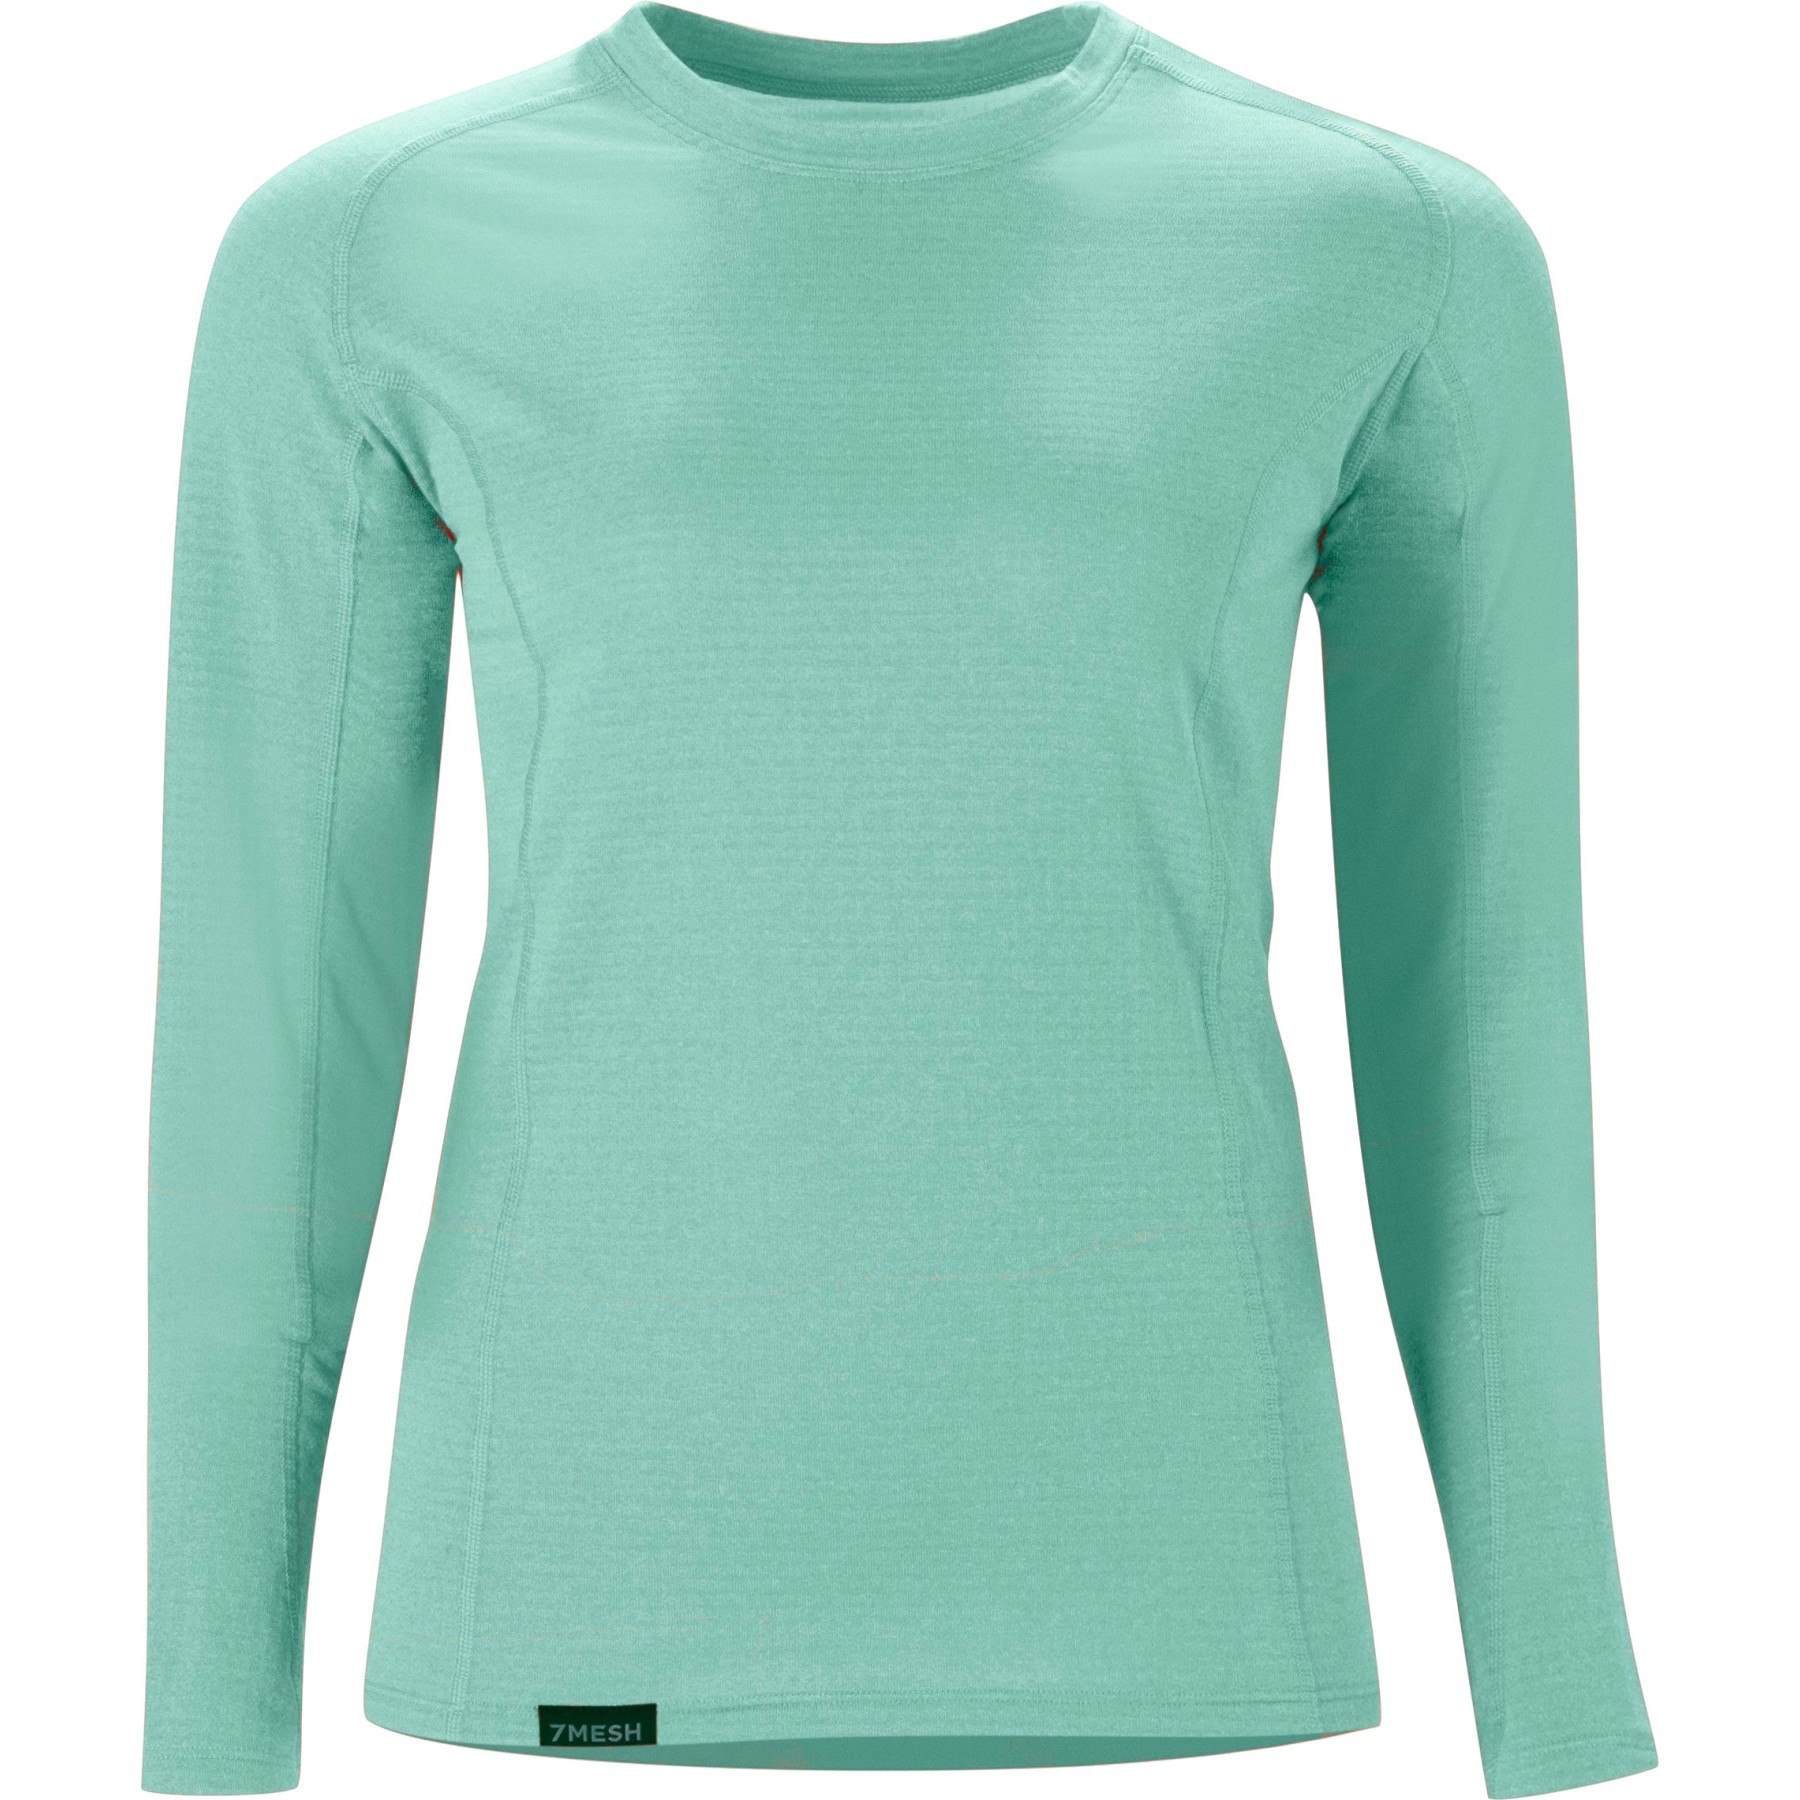 Picture of 7mesh Gryphon Crew Women&#039;s Longsleeve - Yucca